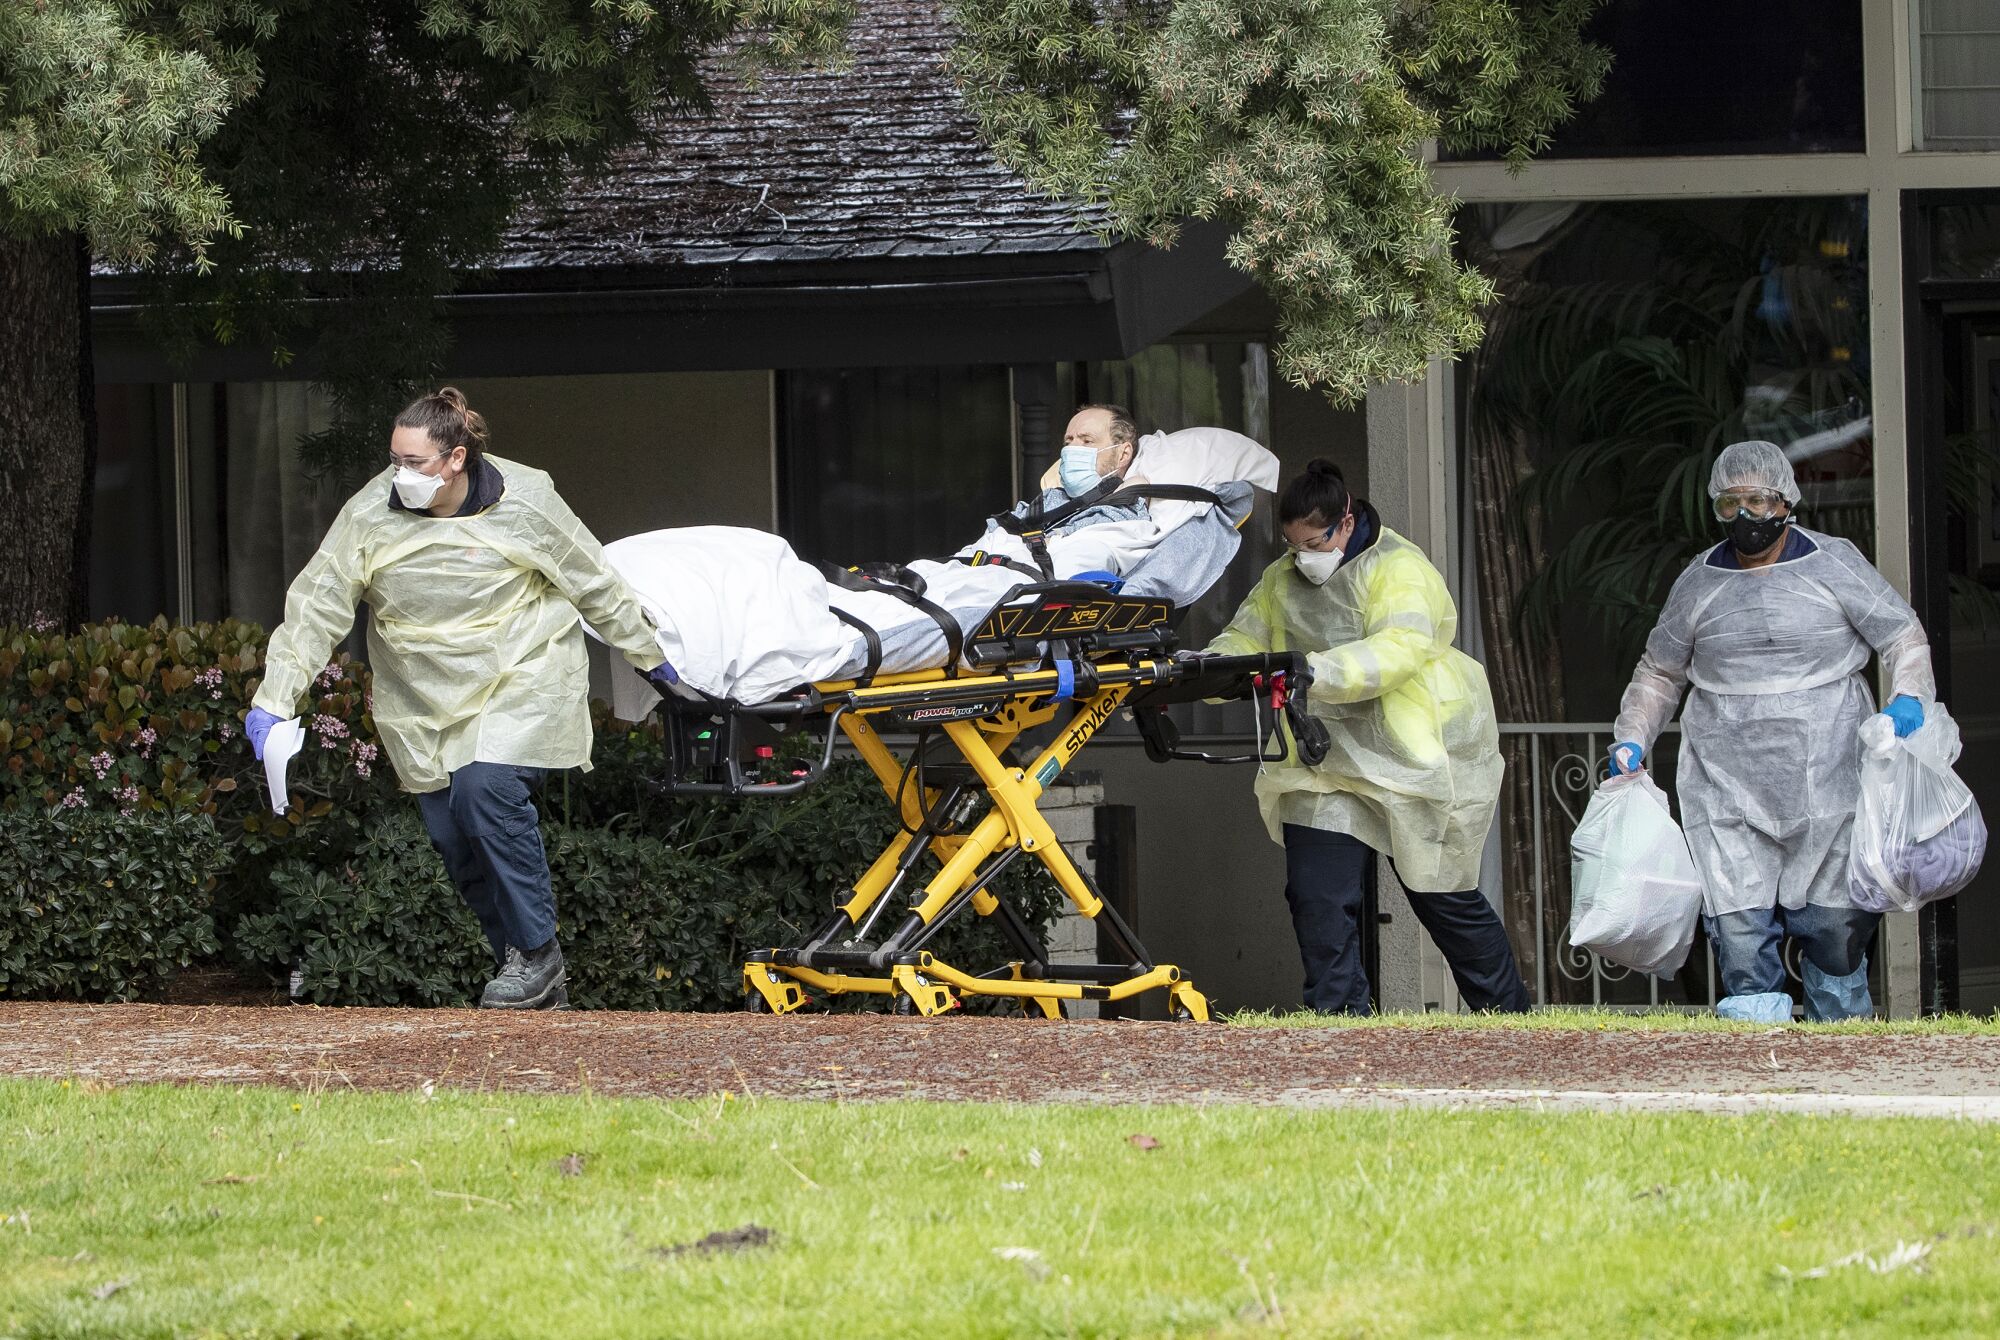 Two people in protective gear pull a stretcher with a patient on a sidewalk. Another carries two large plastic bags.